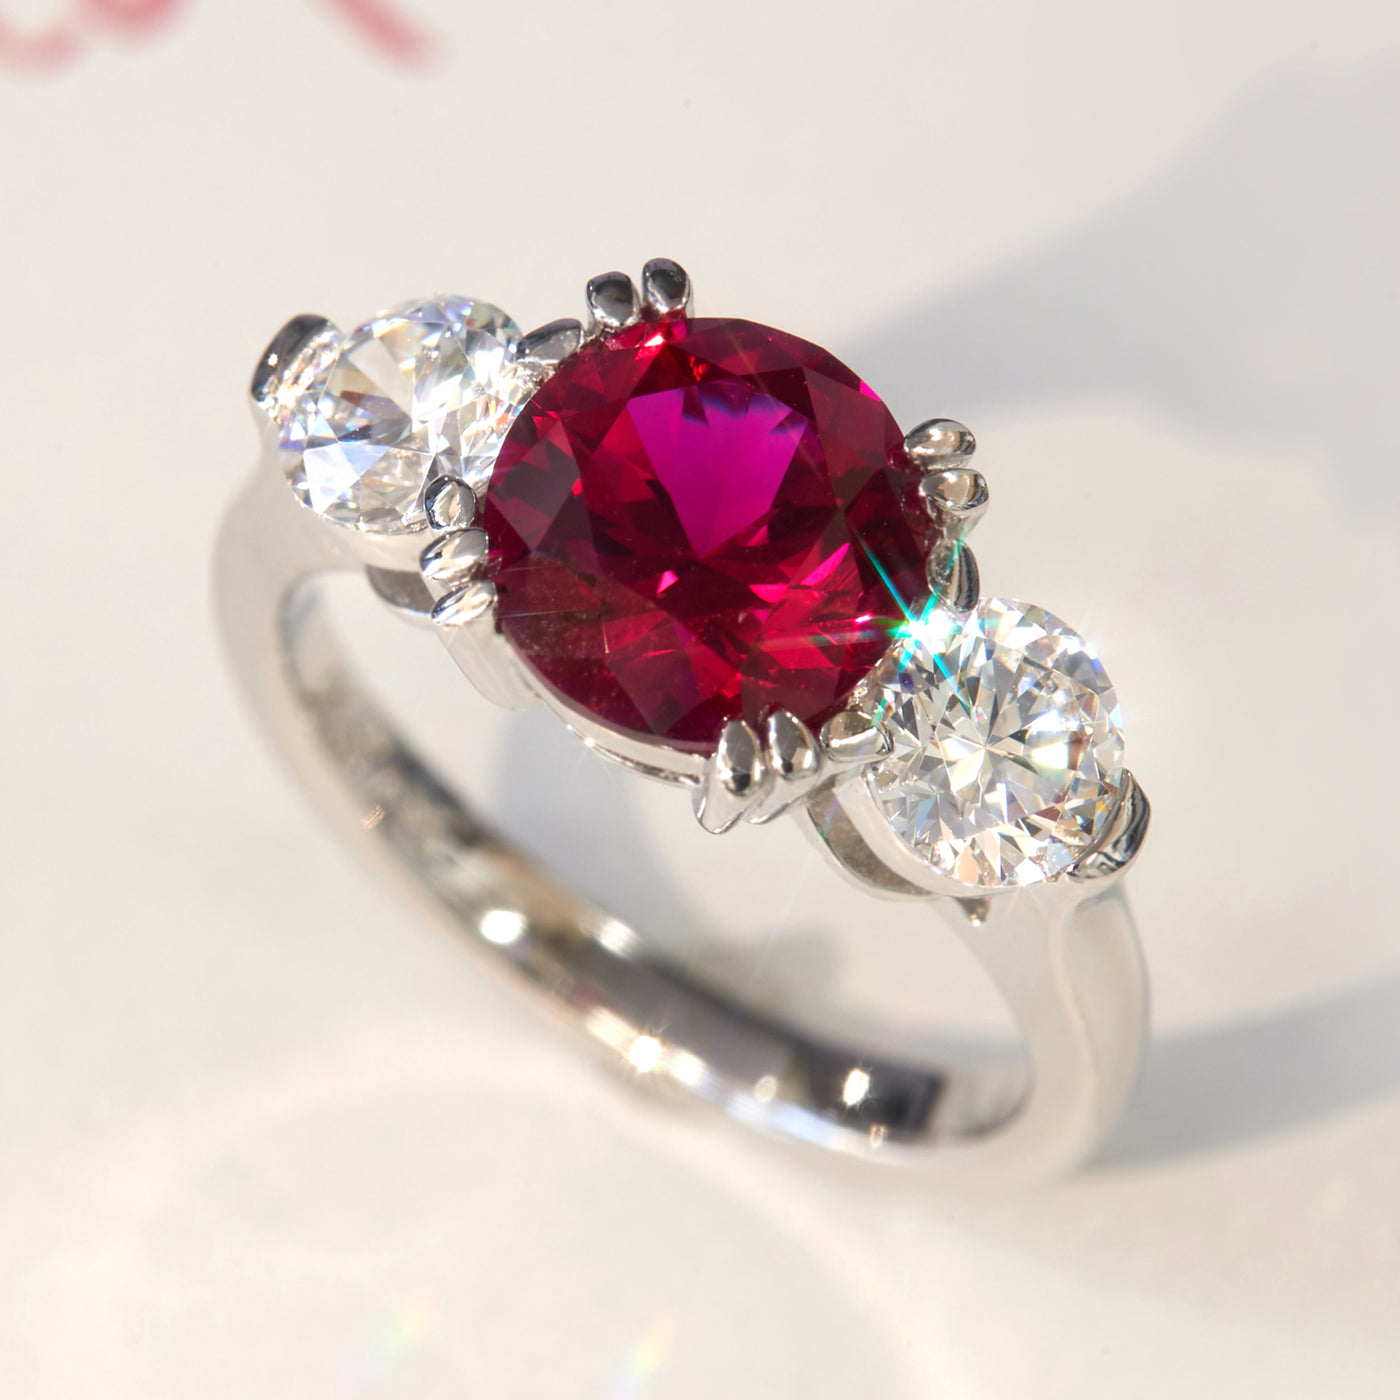 2 CT Red Simulated Ruby Ring, Platinum Plated Sterling Silver